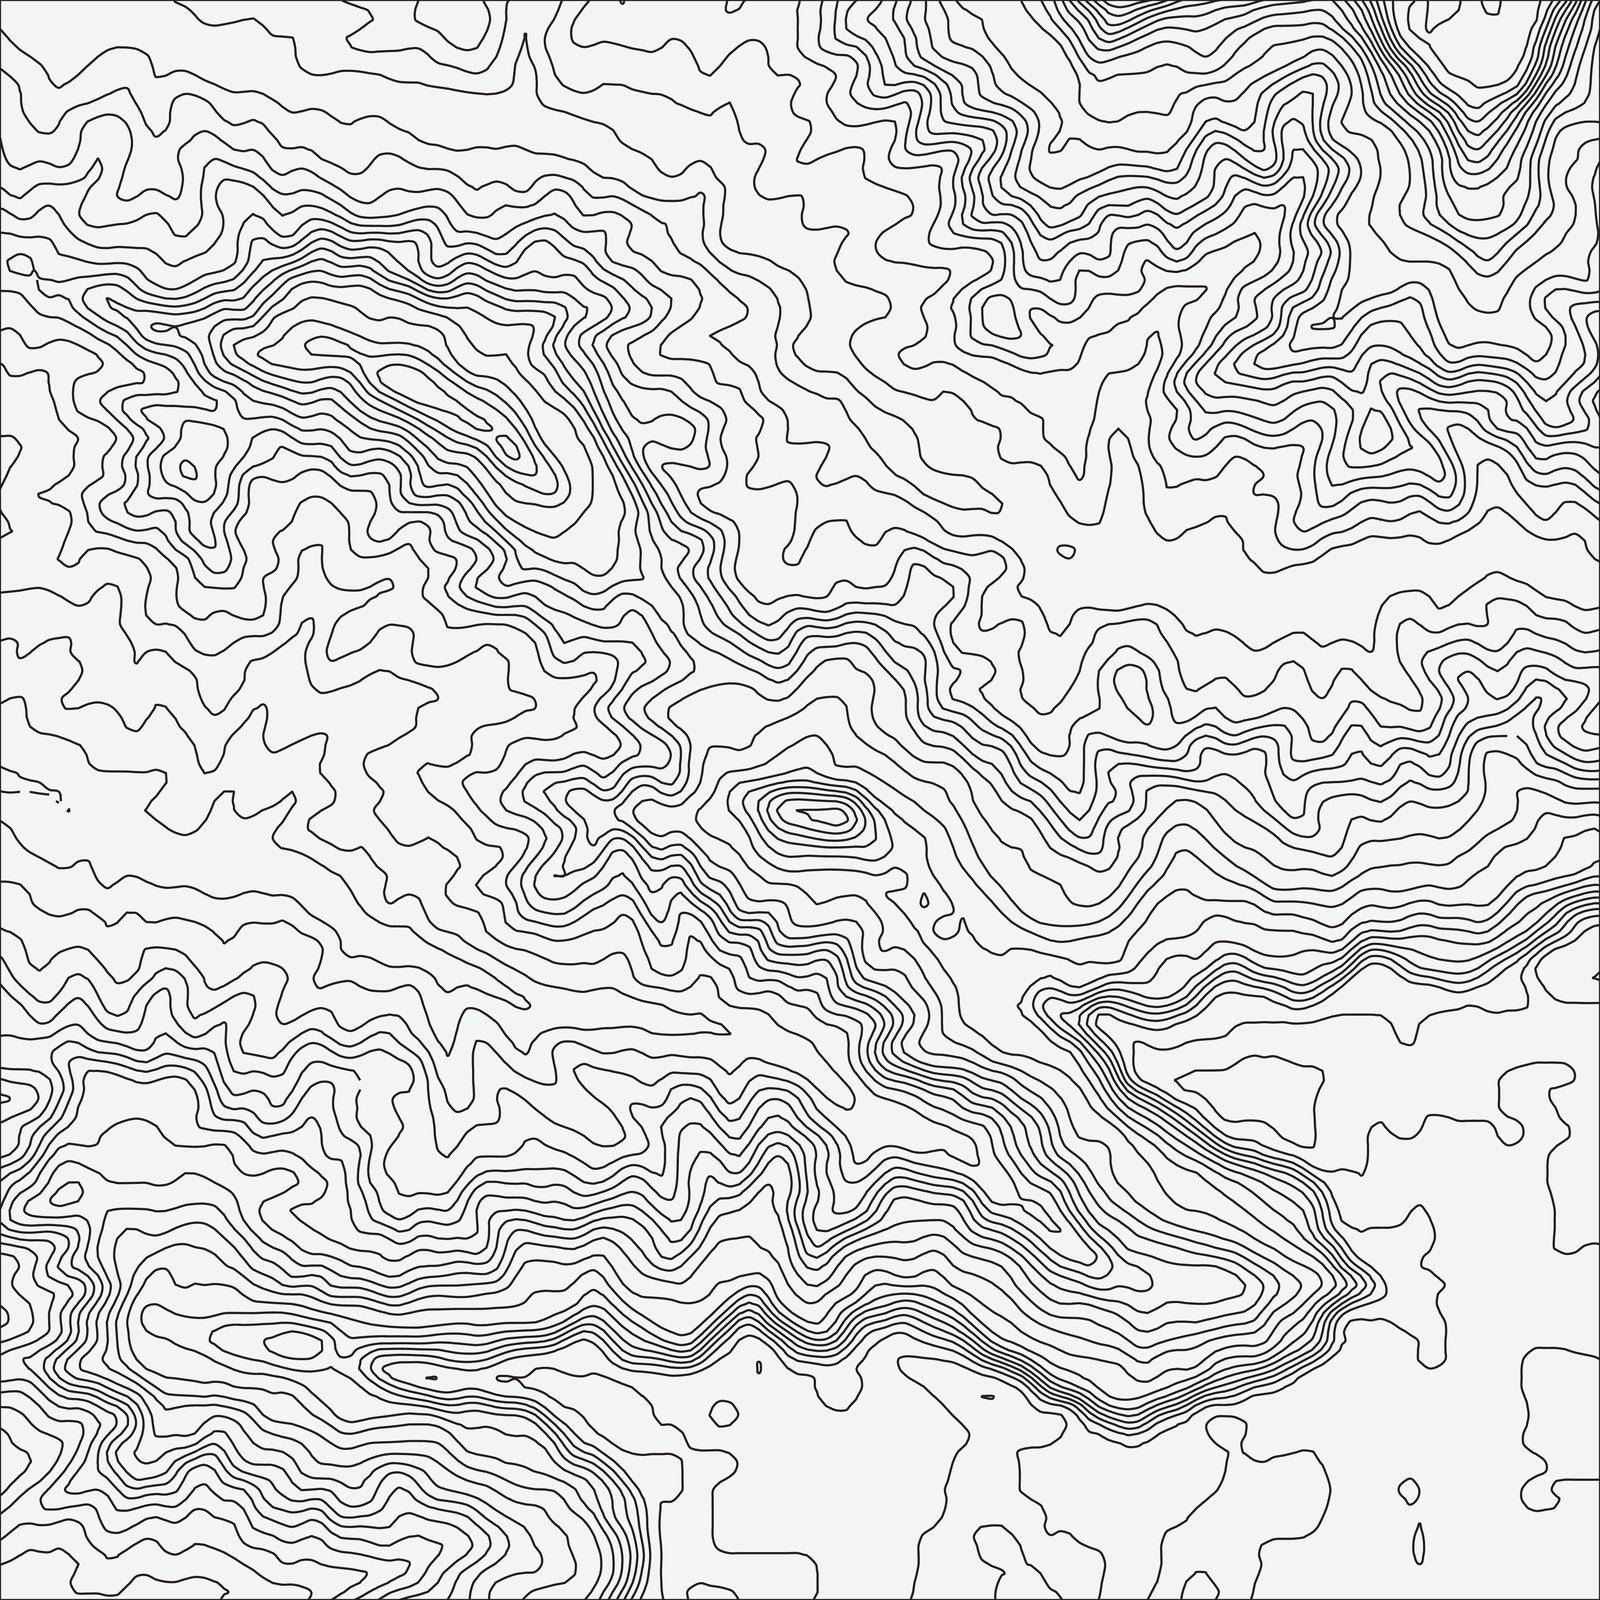 Topographic map background concept with space for your copy. Topo contour map background, vector